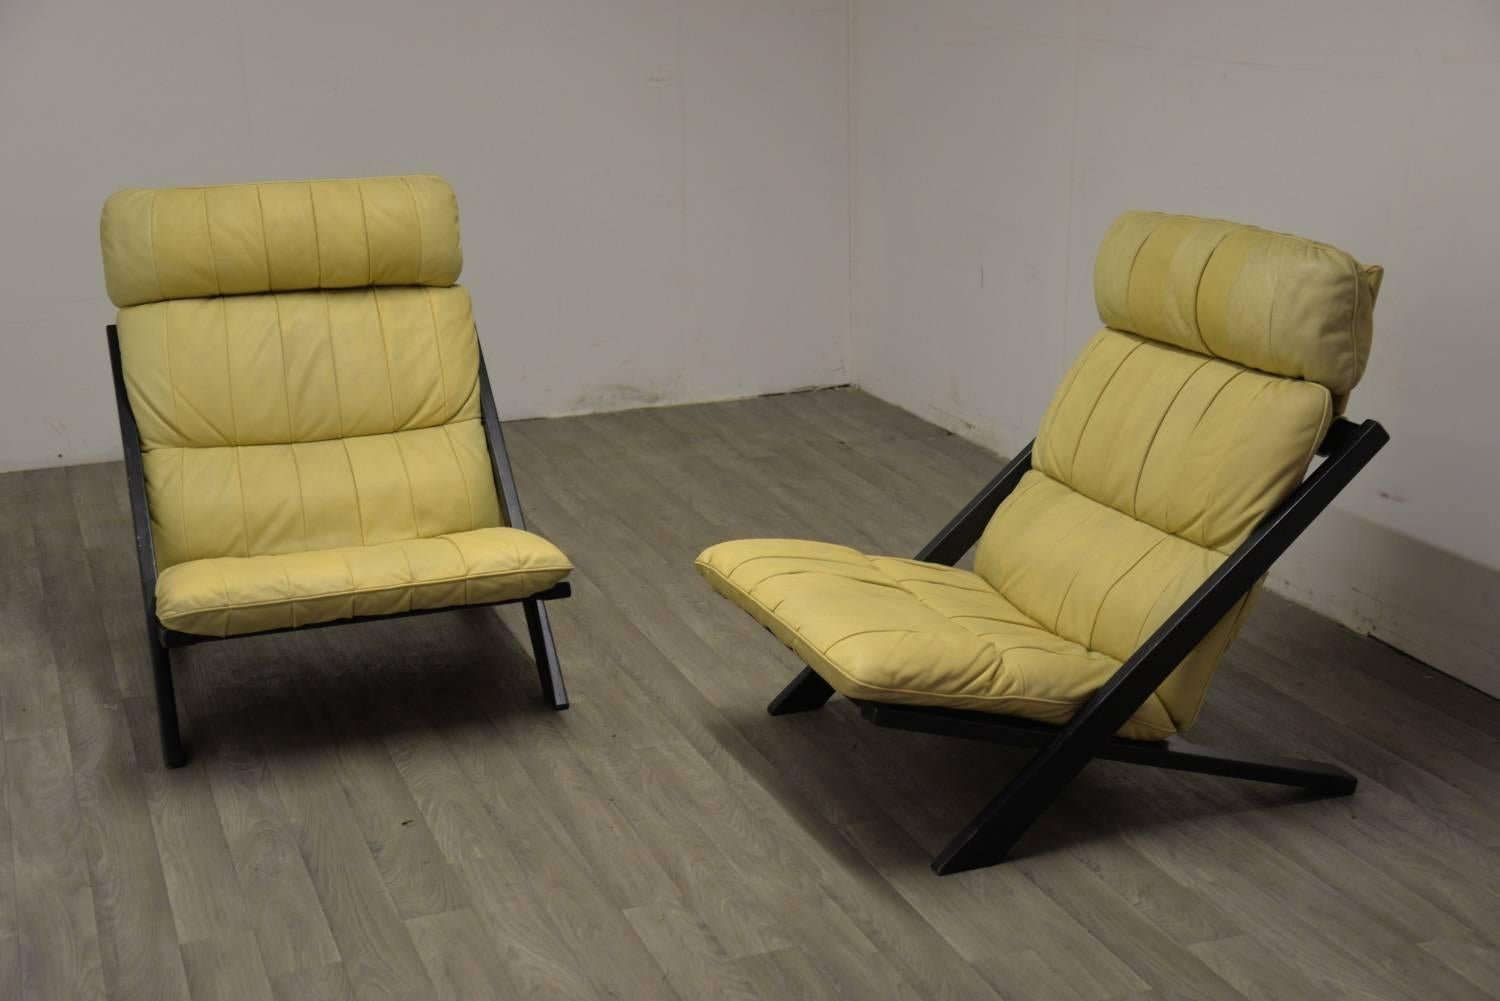 Late 20th Century Patchwork Leather Lounge Chair by Ueli Berger for De Sede, Switzerland 1970`s For Sale